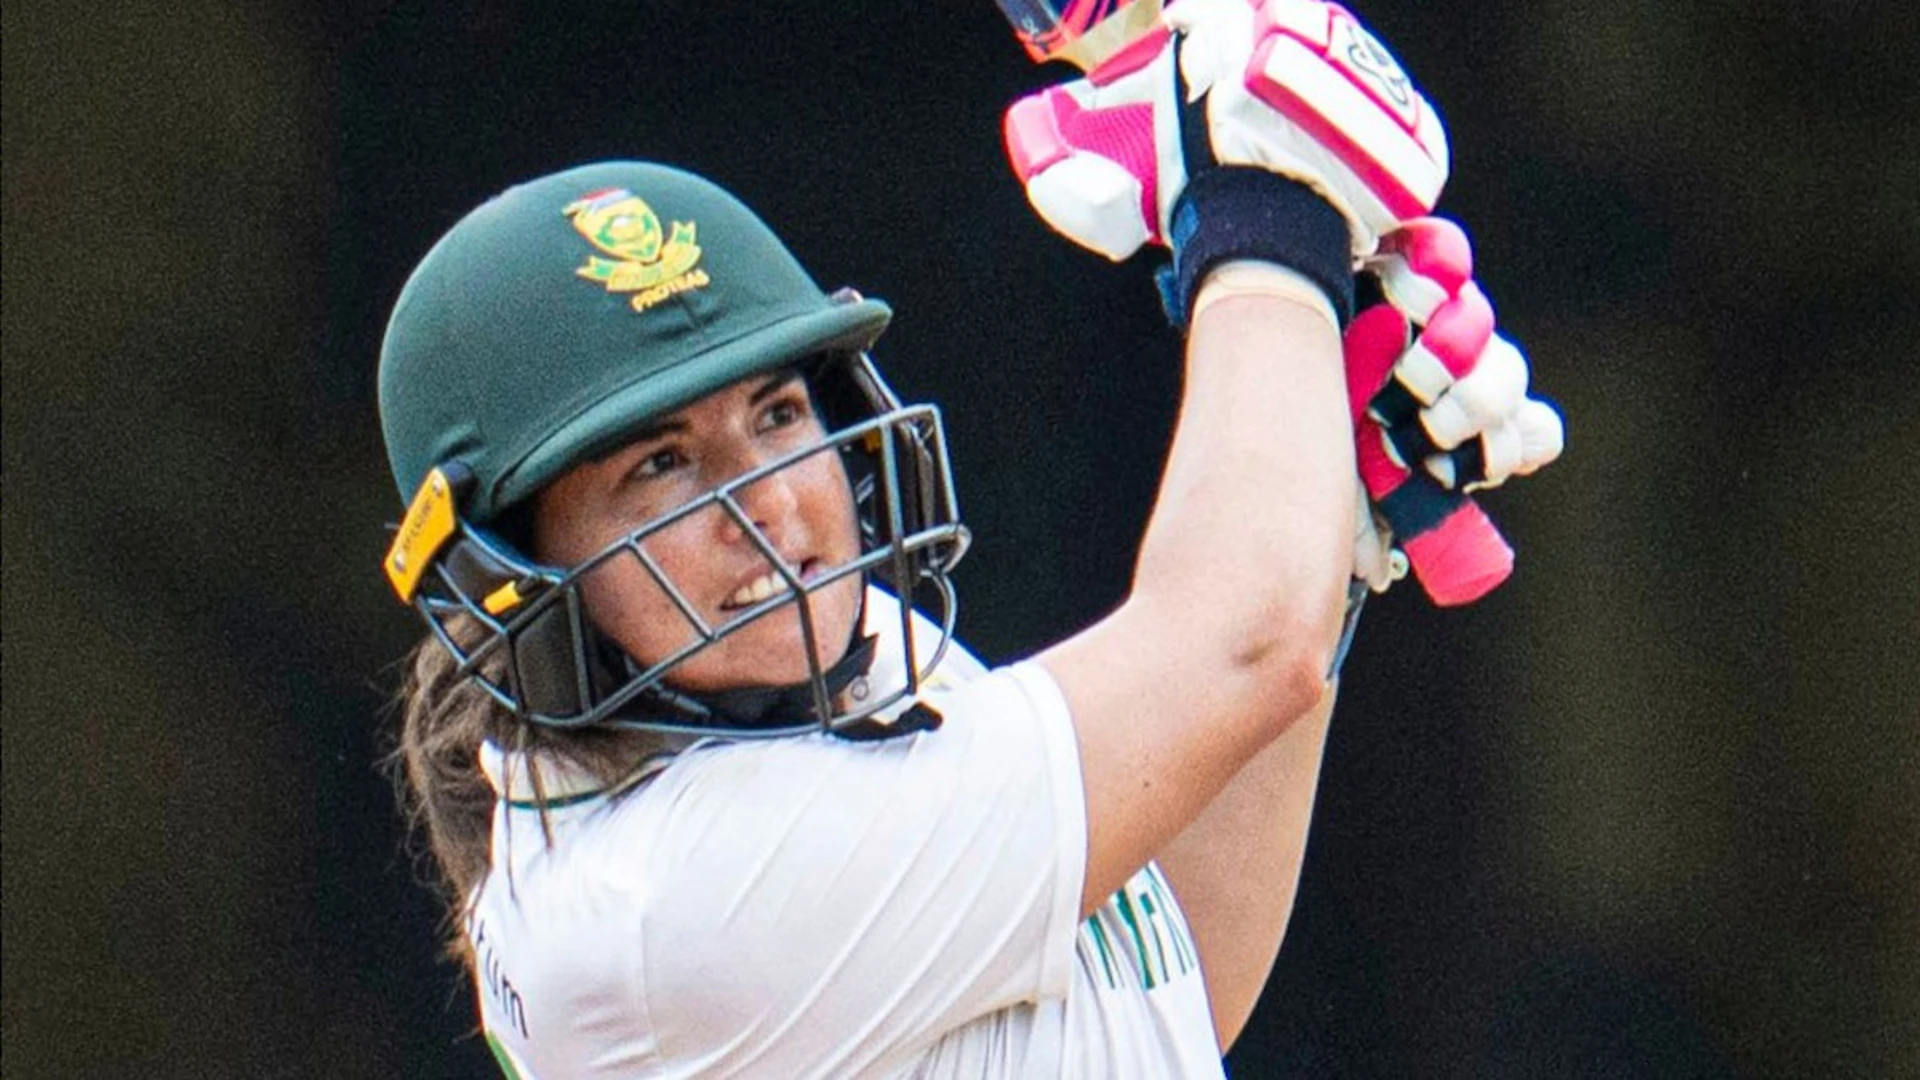 DAY 3: PLuus, Wolvaardt power Proteas women into fourth day of one-off test against India